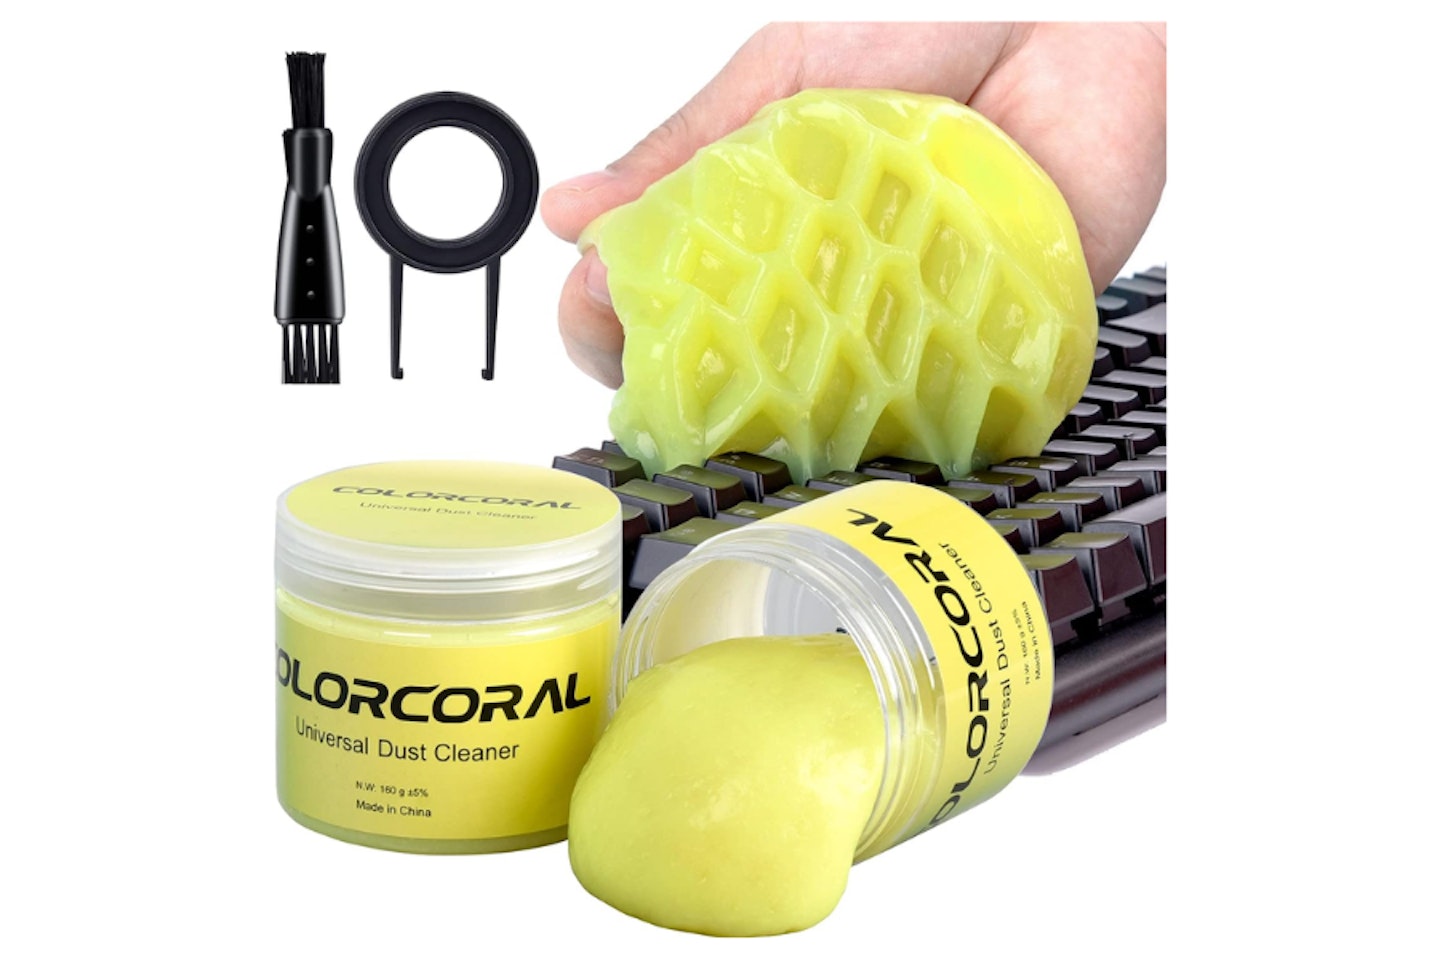 COLORCORAL Keyboard Cleaning Gel Set (2 pack) - one of the best keyboard cleaner products